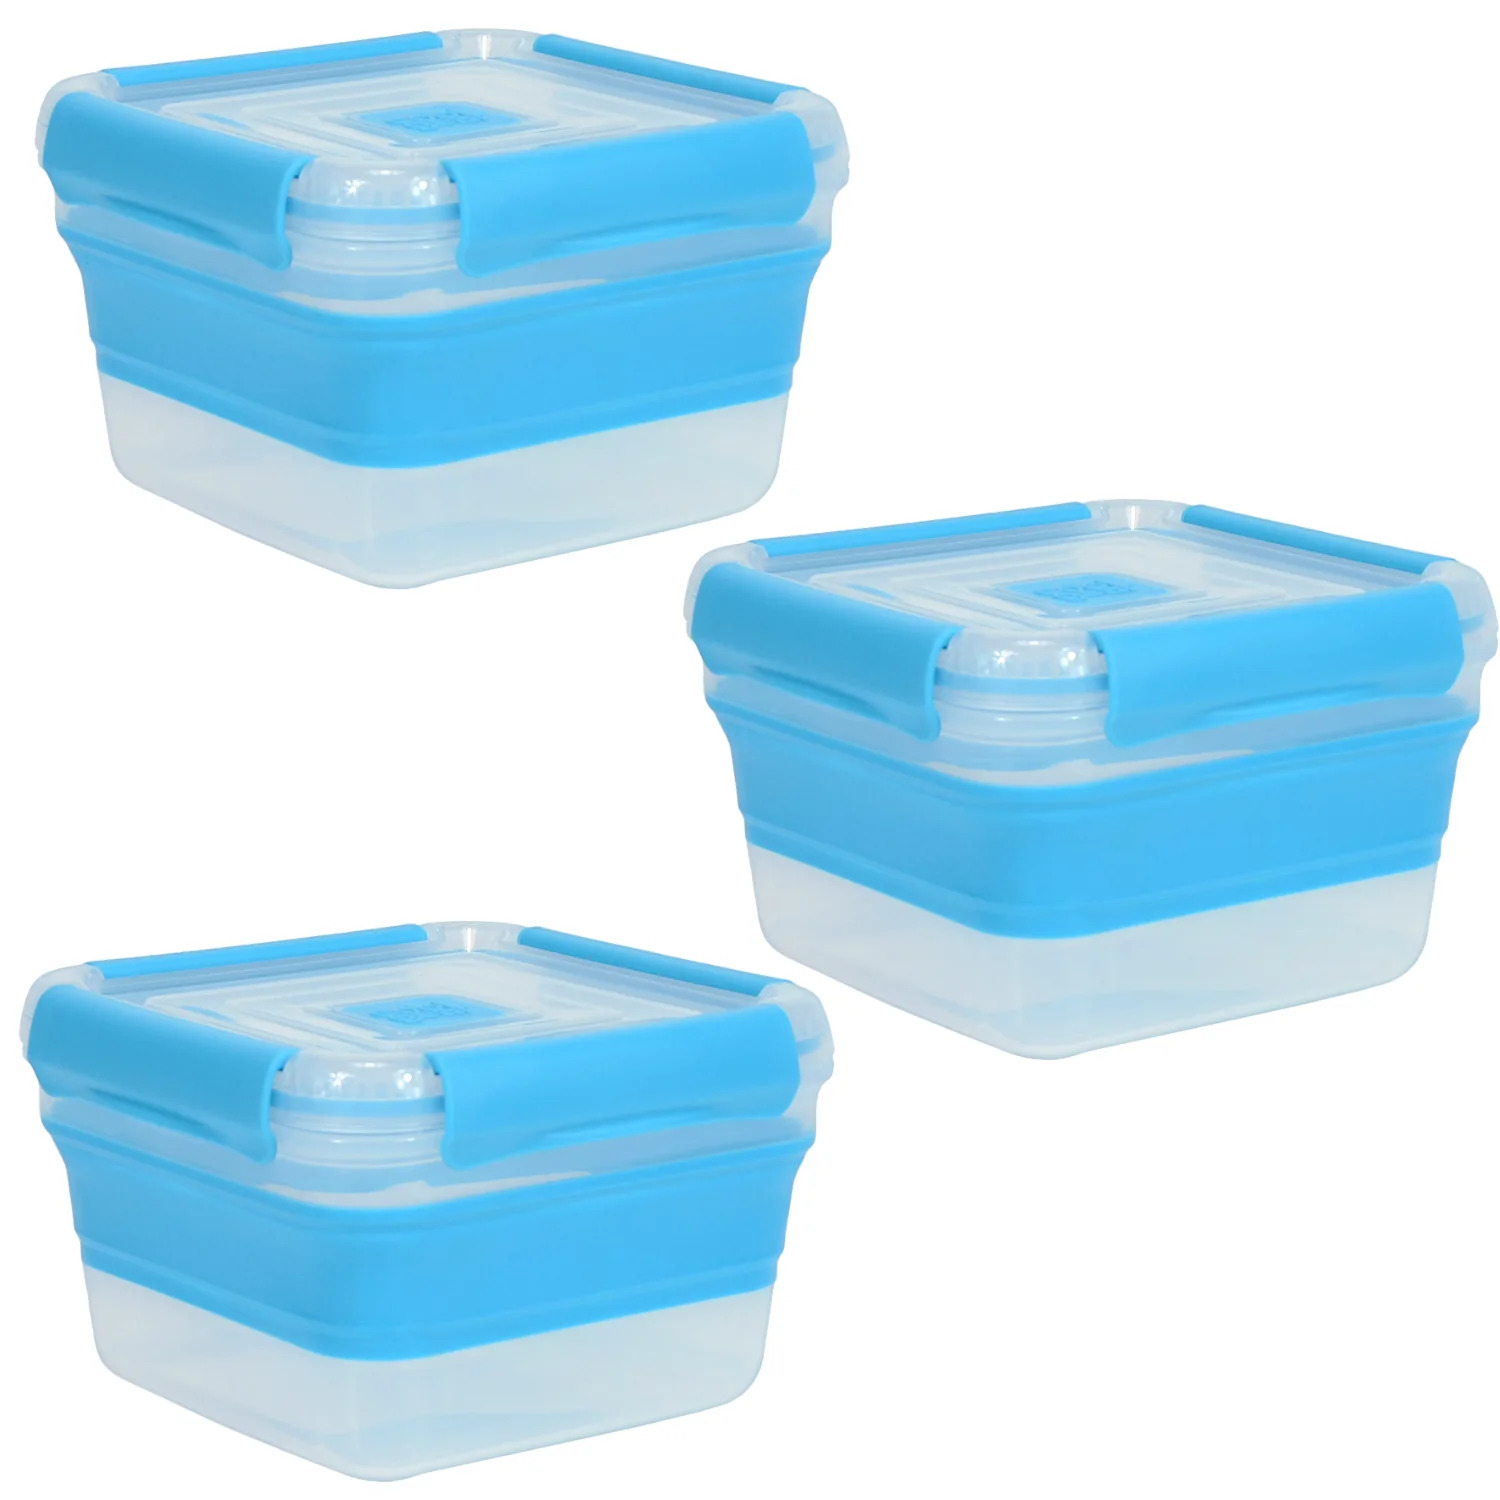 COOL GEAR 3-Pack Collapsible 5.5 Cup Square Food Container | Dishwasher and Microwave Safe | Perfect for On The Go Lunches and Leftovers | Expands to Hold 2x More | Air Tight Snaps Keeps Food Fresh - image 1 of 4